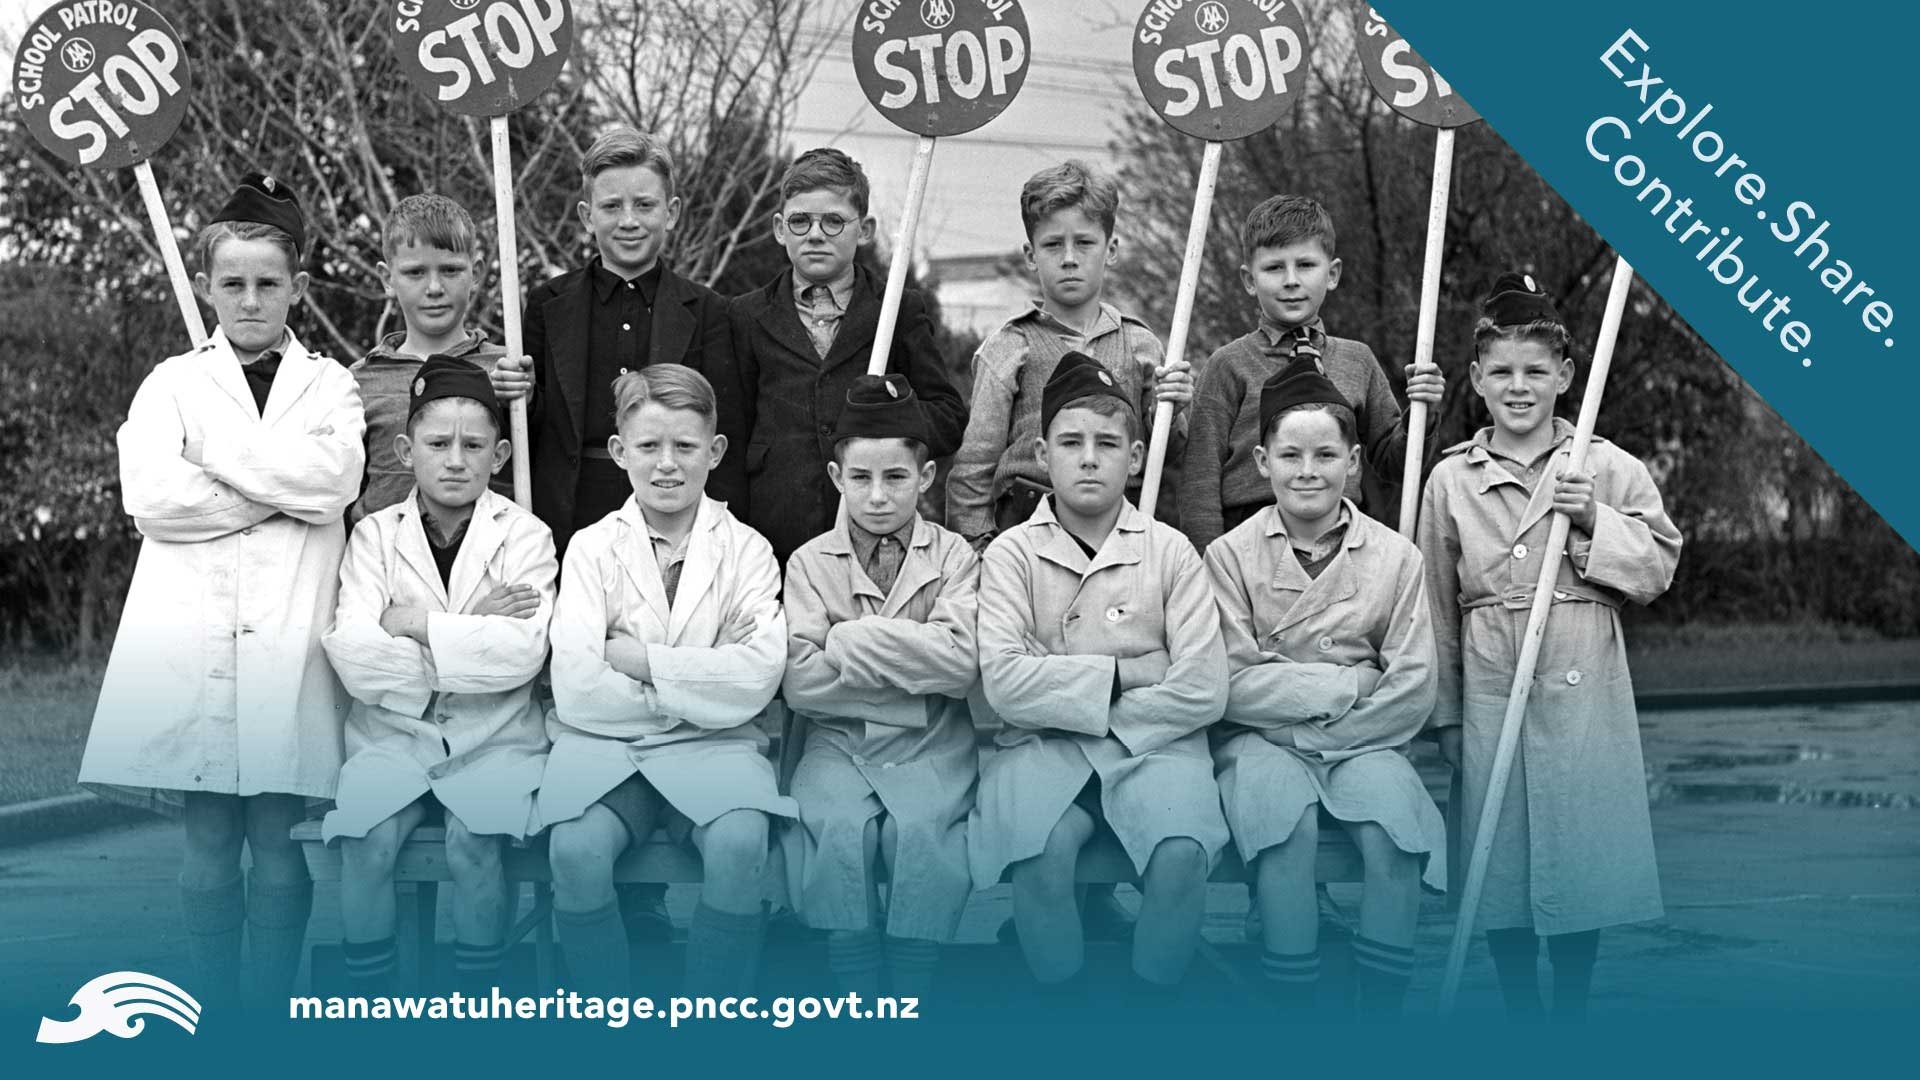 Promotional photo for Manawatu Heritage website shows 1950s schoolboys with stop signs. Text says Explore, Share, Contribute.